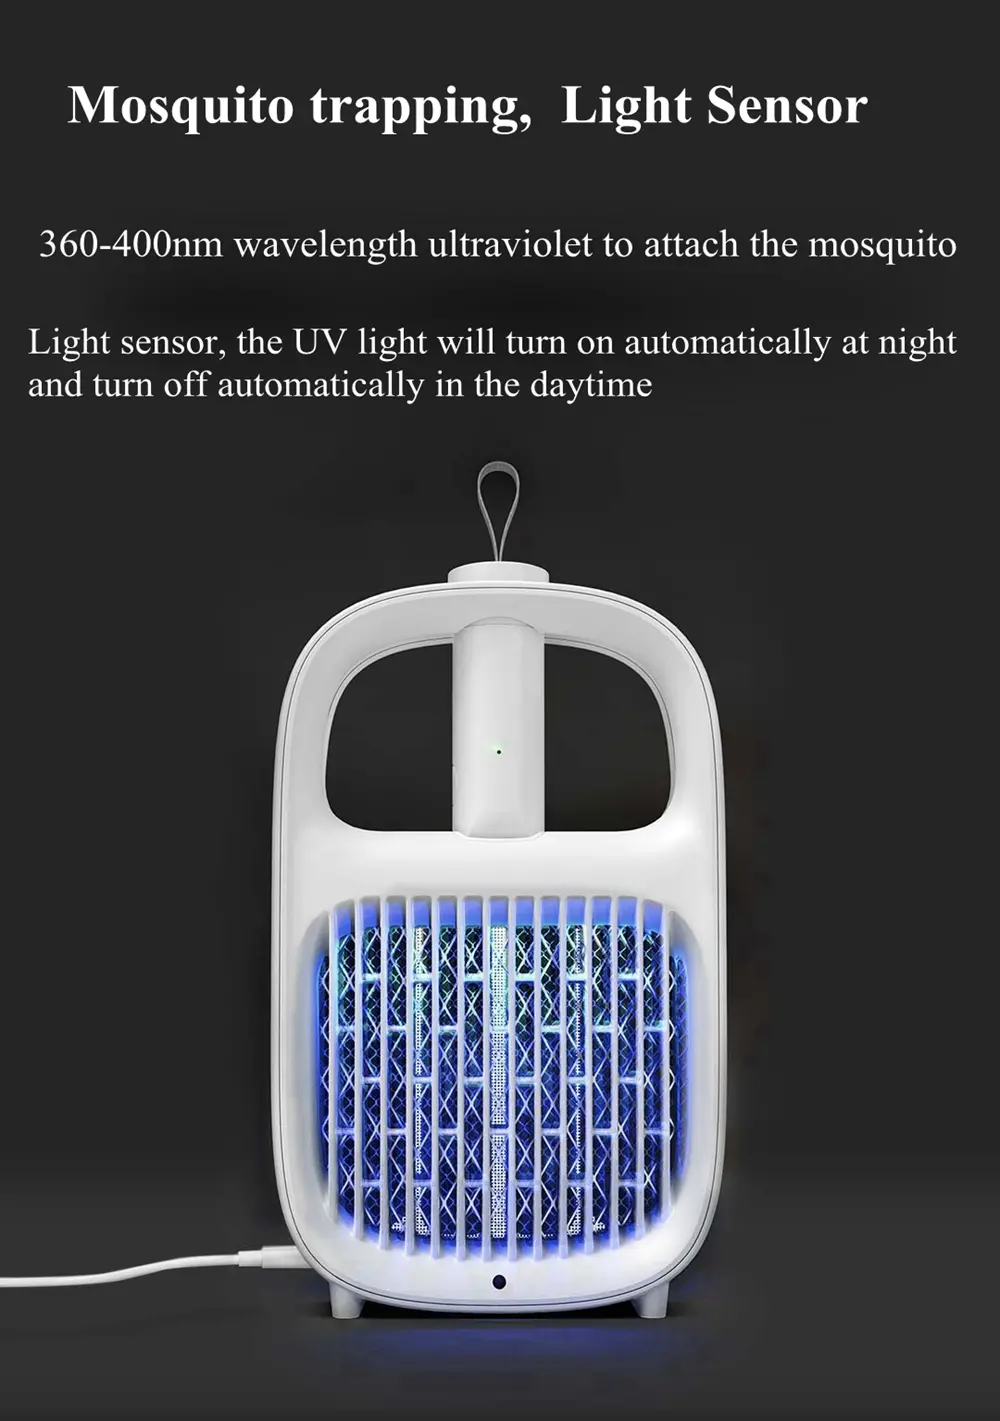 B85Bd99C 4Fd8 4023 9Cb9 71C5967Cfd61.Jpg &Lt;H1&Gt;Yeelight Usb Rechargeable Mosquito Swatter Led Uv Mosquito Killer Lamp&Lt;/H1&Gt; &Lt;H2&Gt;&Lt;Strong&Gt;Main Feature:&Lt;/Strong&Gt;&Lt;/H2&Gt; &Lt;Ul&Gt; &Lt;Li&Gt;Electric Mosquito Swatter: Built-In Rechargeable 18650 Battery, Short Charging Time, Long Use Time&Lt;/Li&Gt; &Lt;Li&Gt;360-400Nm Uv Trap Lamp: Comes With A Light-Controlled Sensor,  Easy To Kill Mosquitoes In Dark Environments&Lt;/Li&Gt; &Lt;Li&Gt;Safe To Use: Physical Mosquito Killing, No Chemicals, No Radiation, And Entirely Non-Toxic. Health And Environmental Protection&Lt;/Li&Gt; &Lt;Li&Gt;Portable To Carry: This Mosquito Zapper Comes In A Practical Design, With The Small Dimensions Allowing You To Carry It Anywhere You Need It!&Lt;/Li&Gt; &Lt;/Ul&Gt; Yeelight Usb Rechargeable Mosquito Yeelight Usb Rechargeable Mosquito Swatter Led Uv Mosquito Killer Lamp